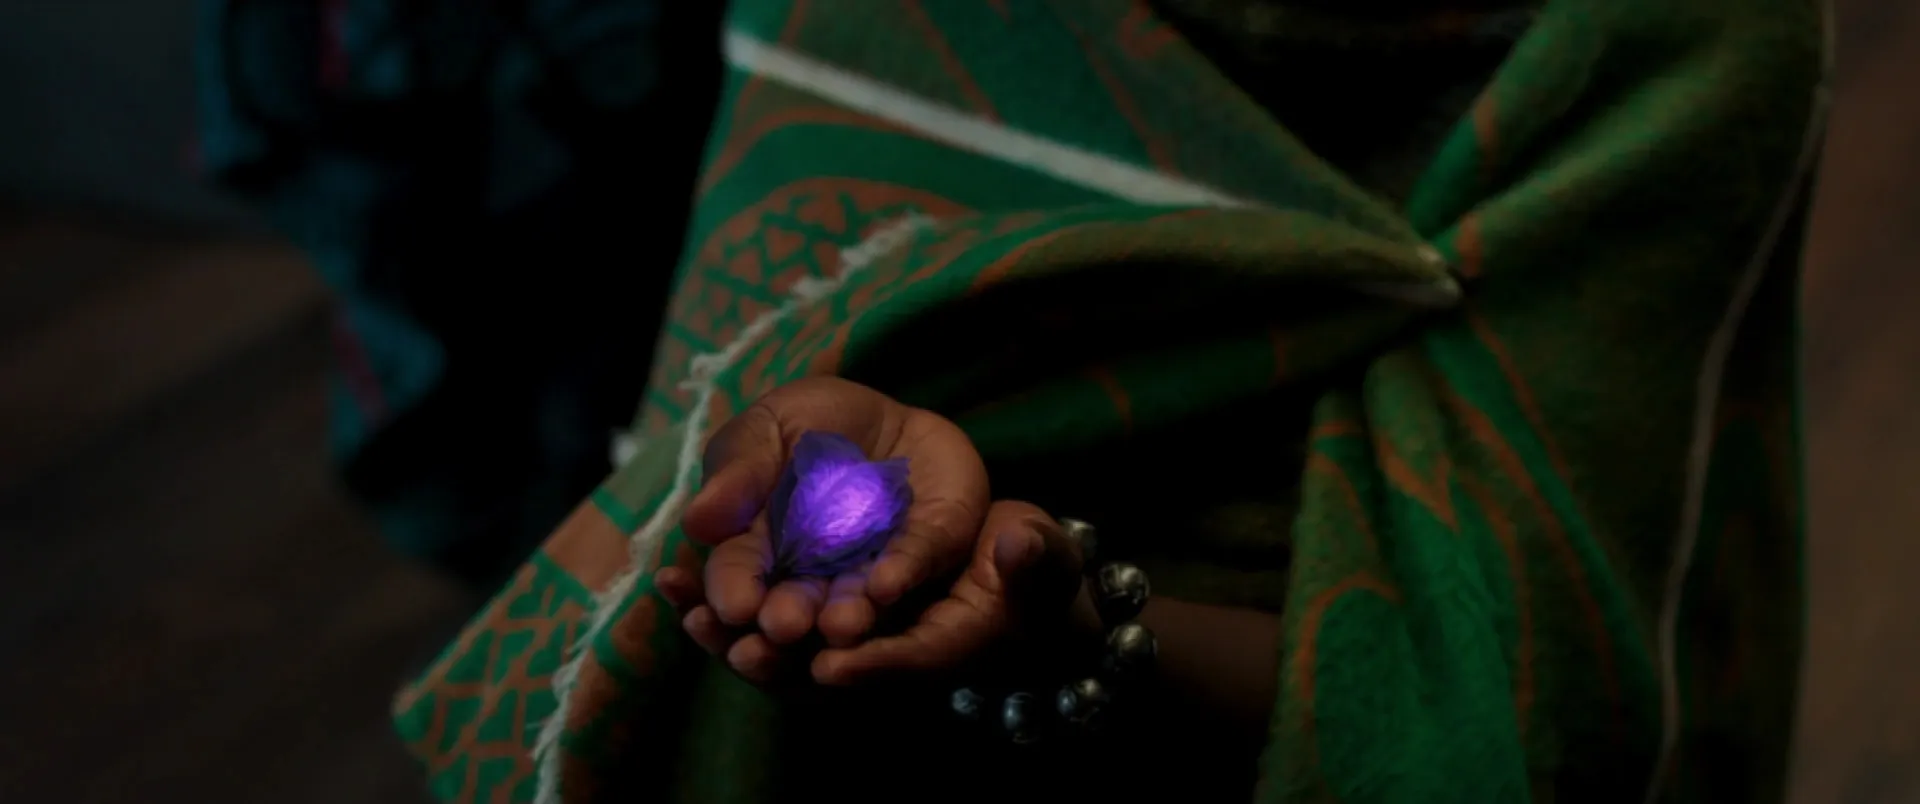 The heart-shaped herb in Black Panther